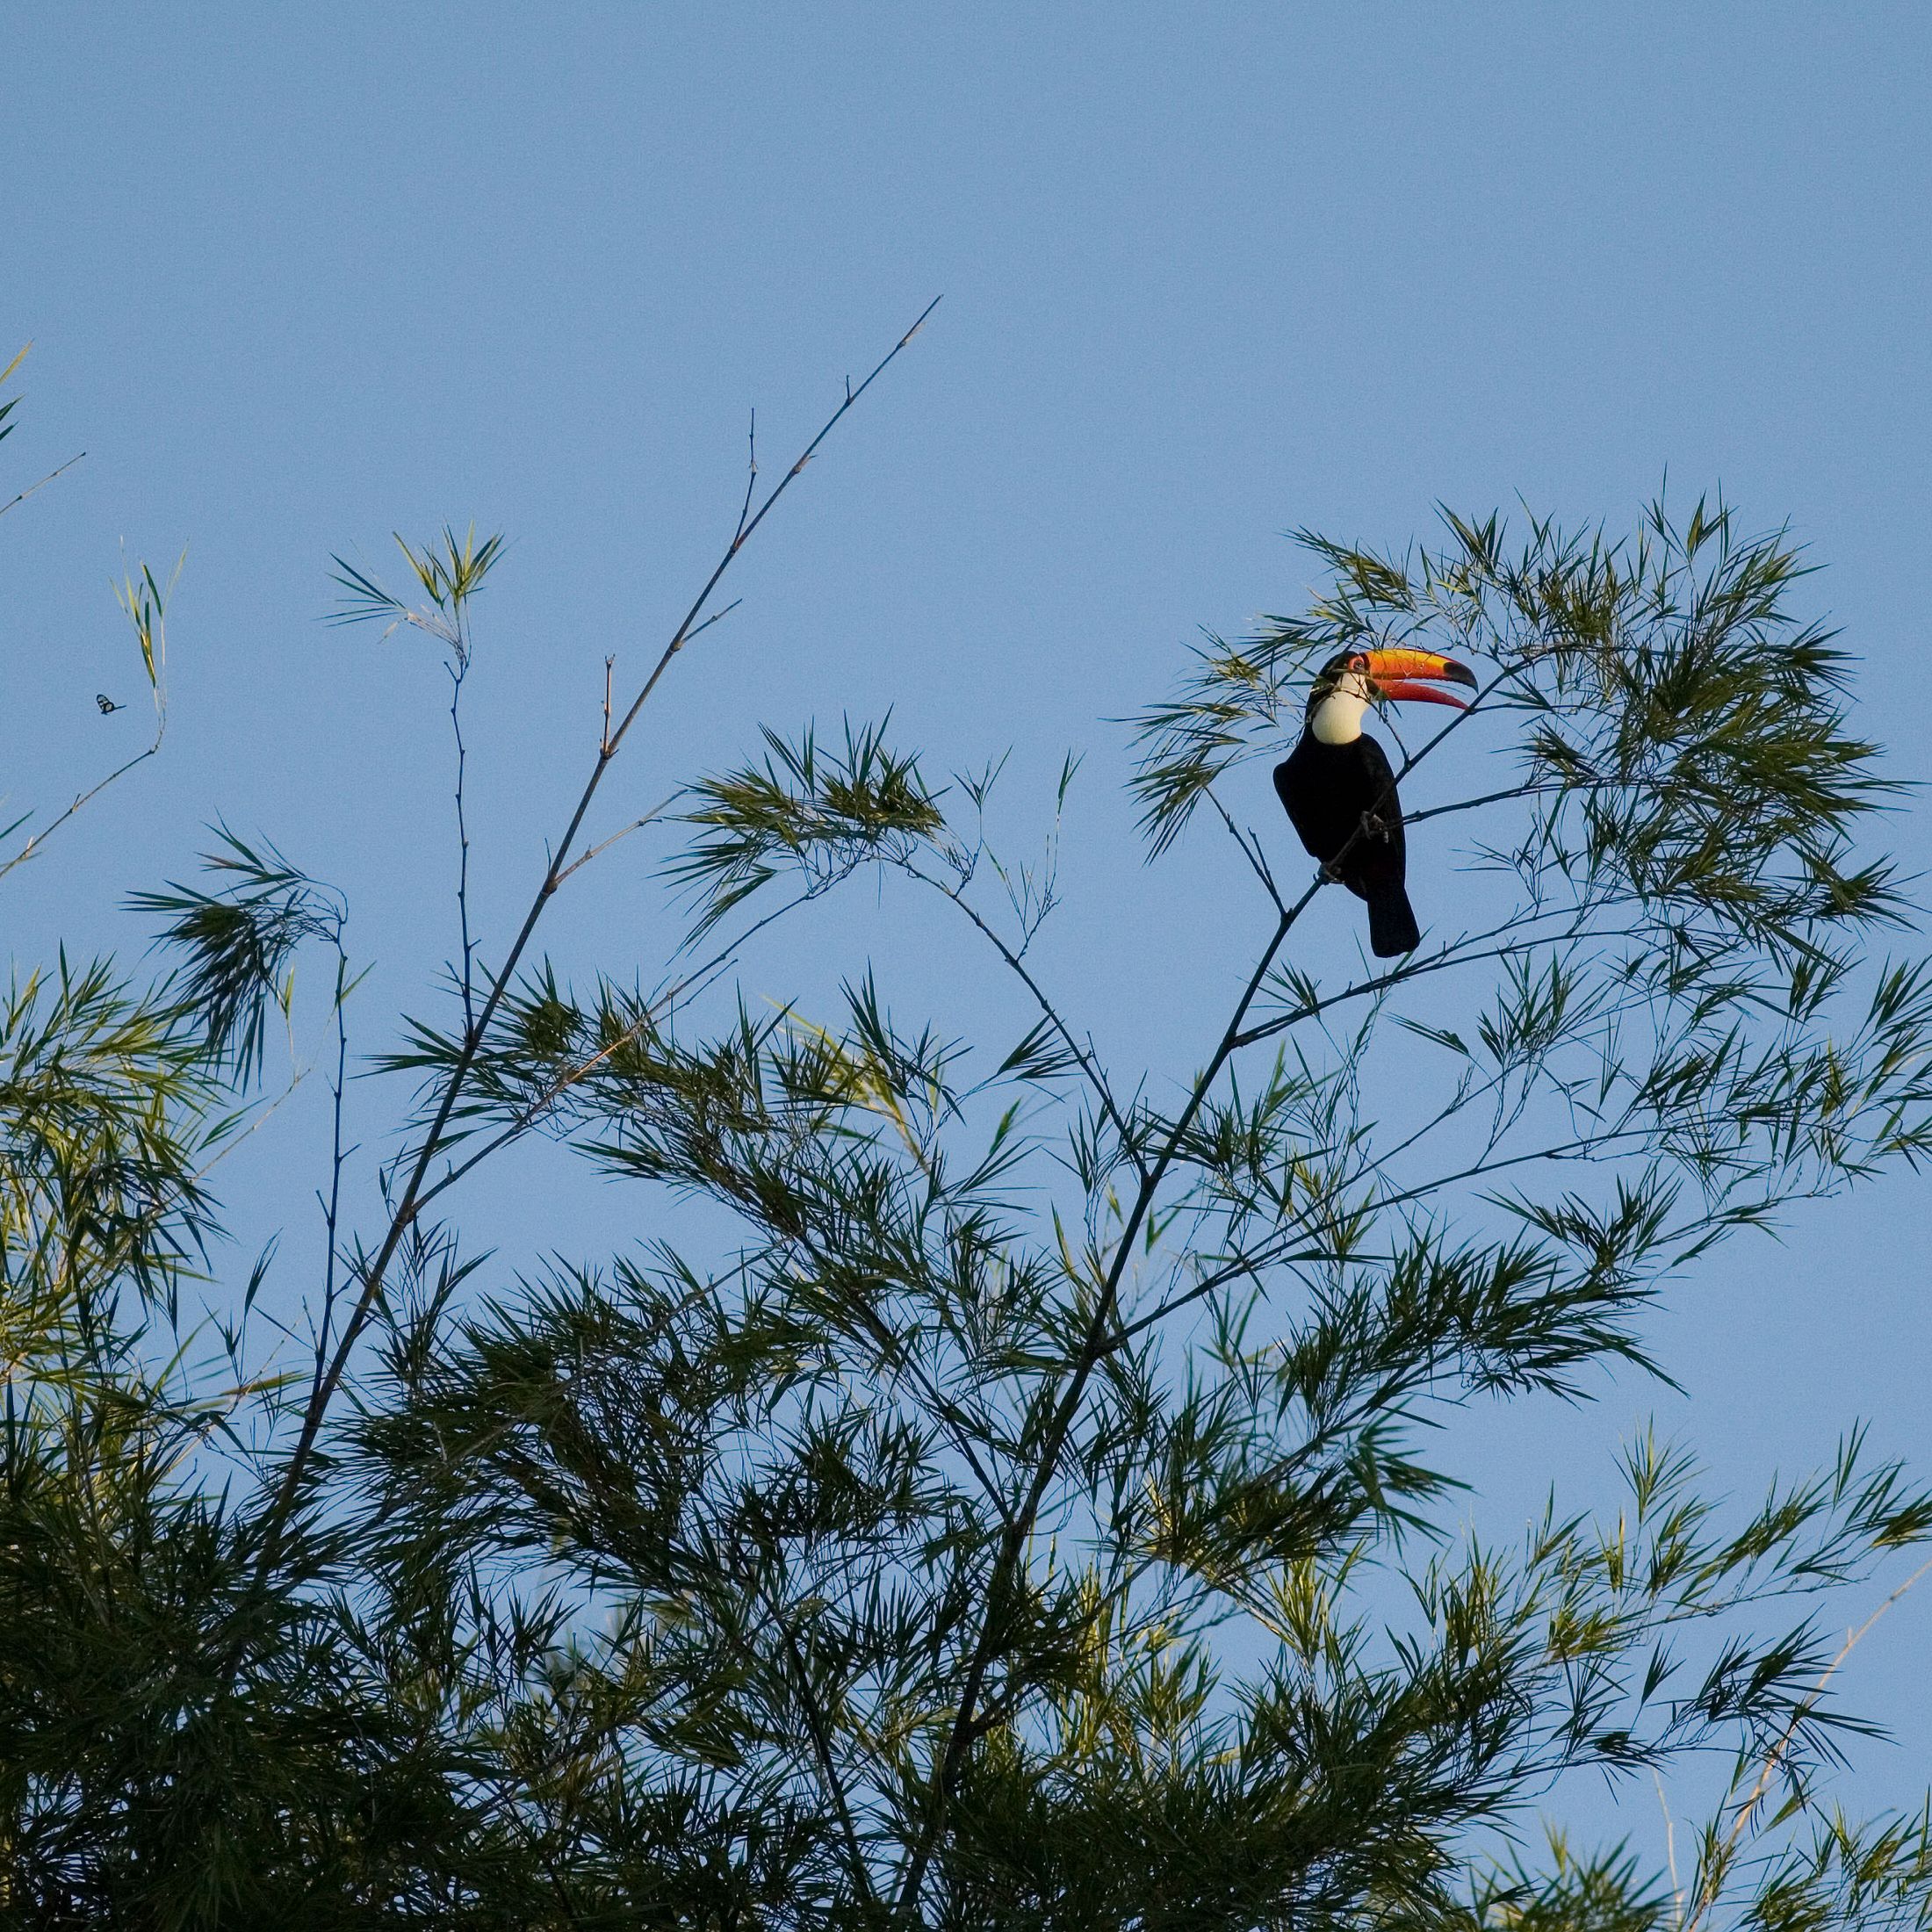 Toucan perched in bamboo along the Iguazu River.